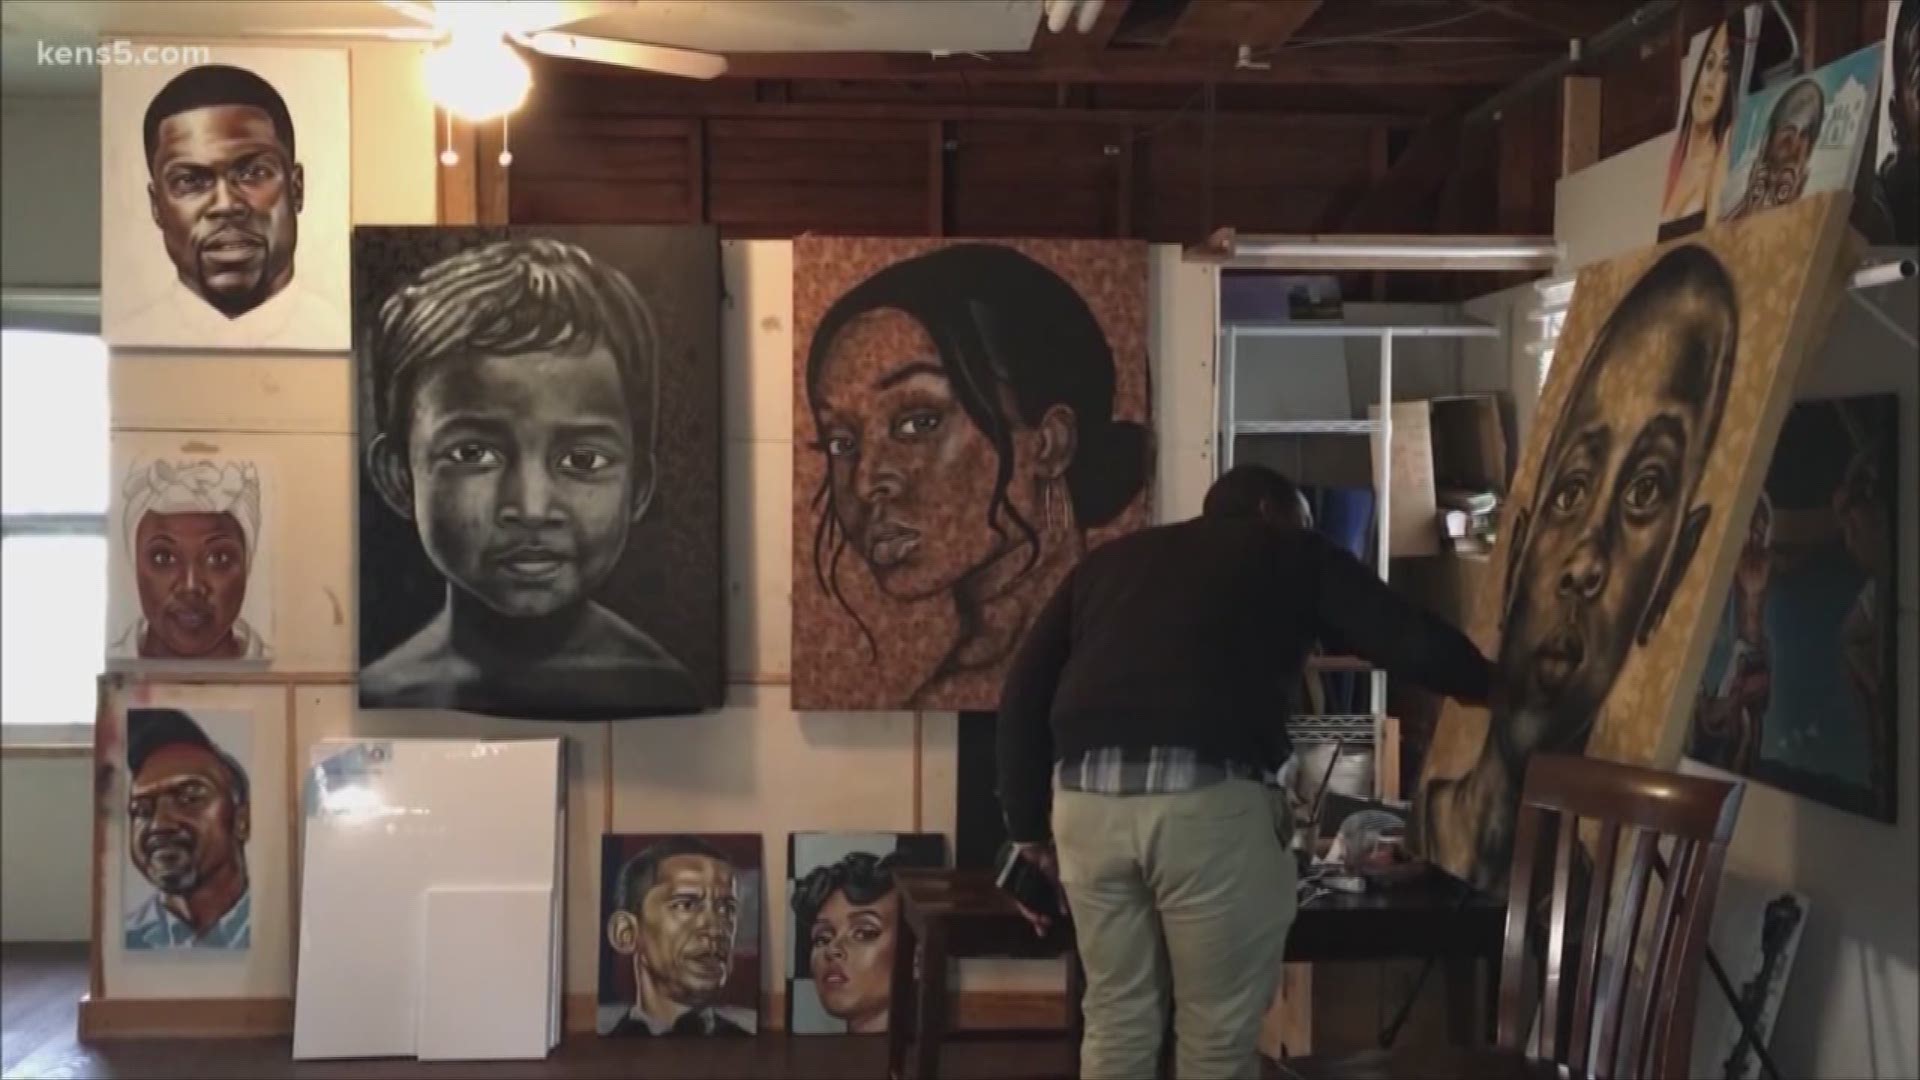 A San Antonio artist is gaining national attention for bringing diversity to portrait art.